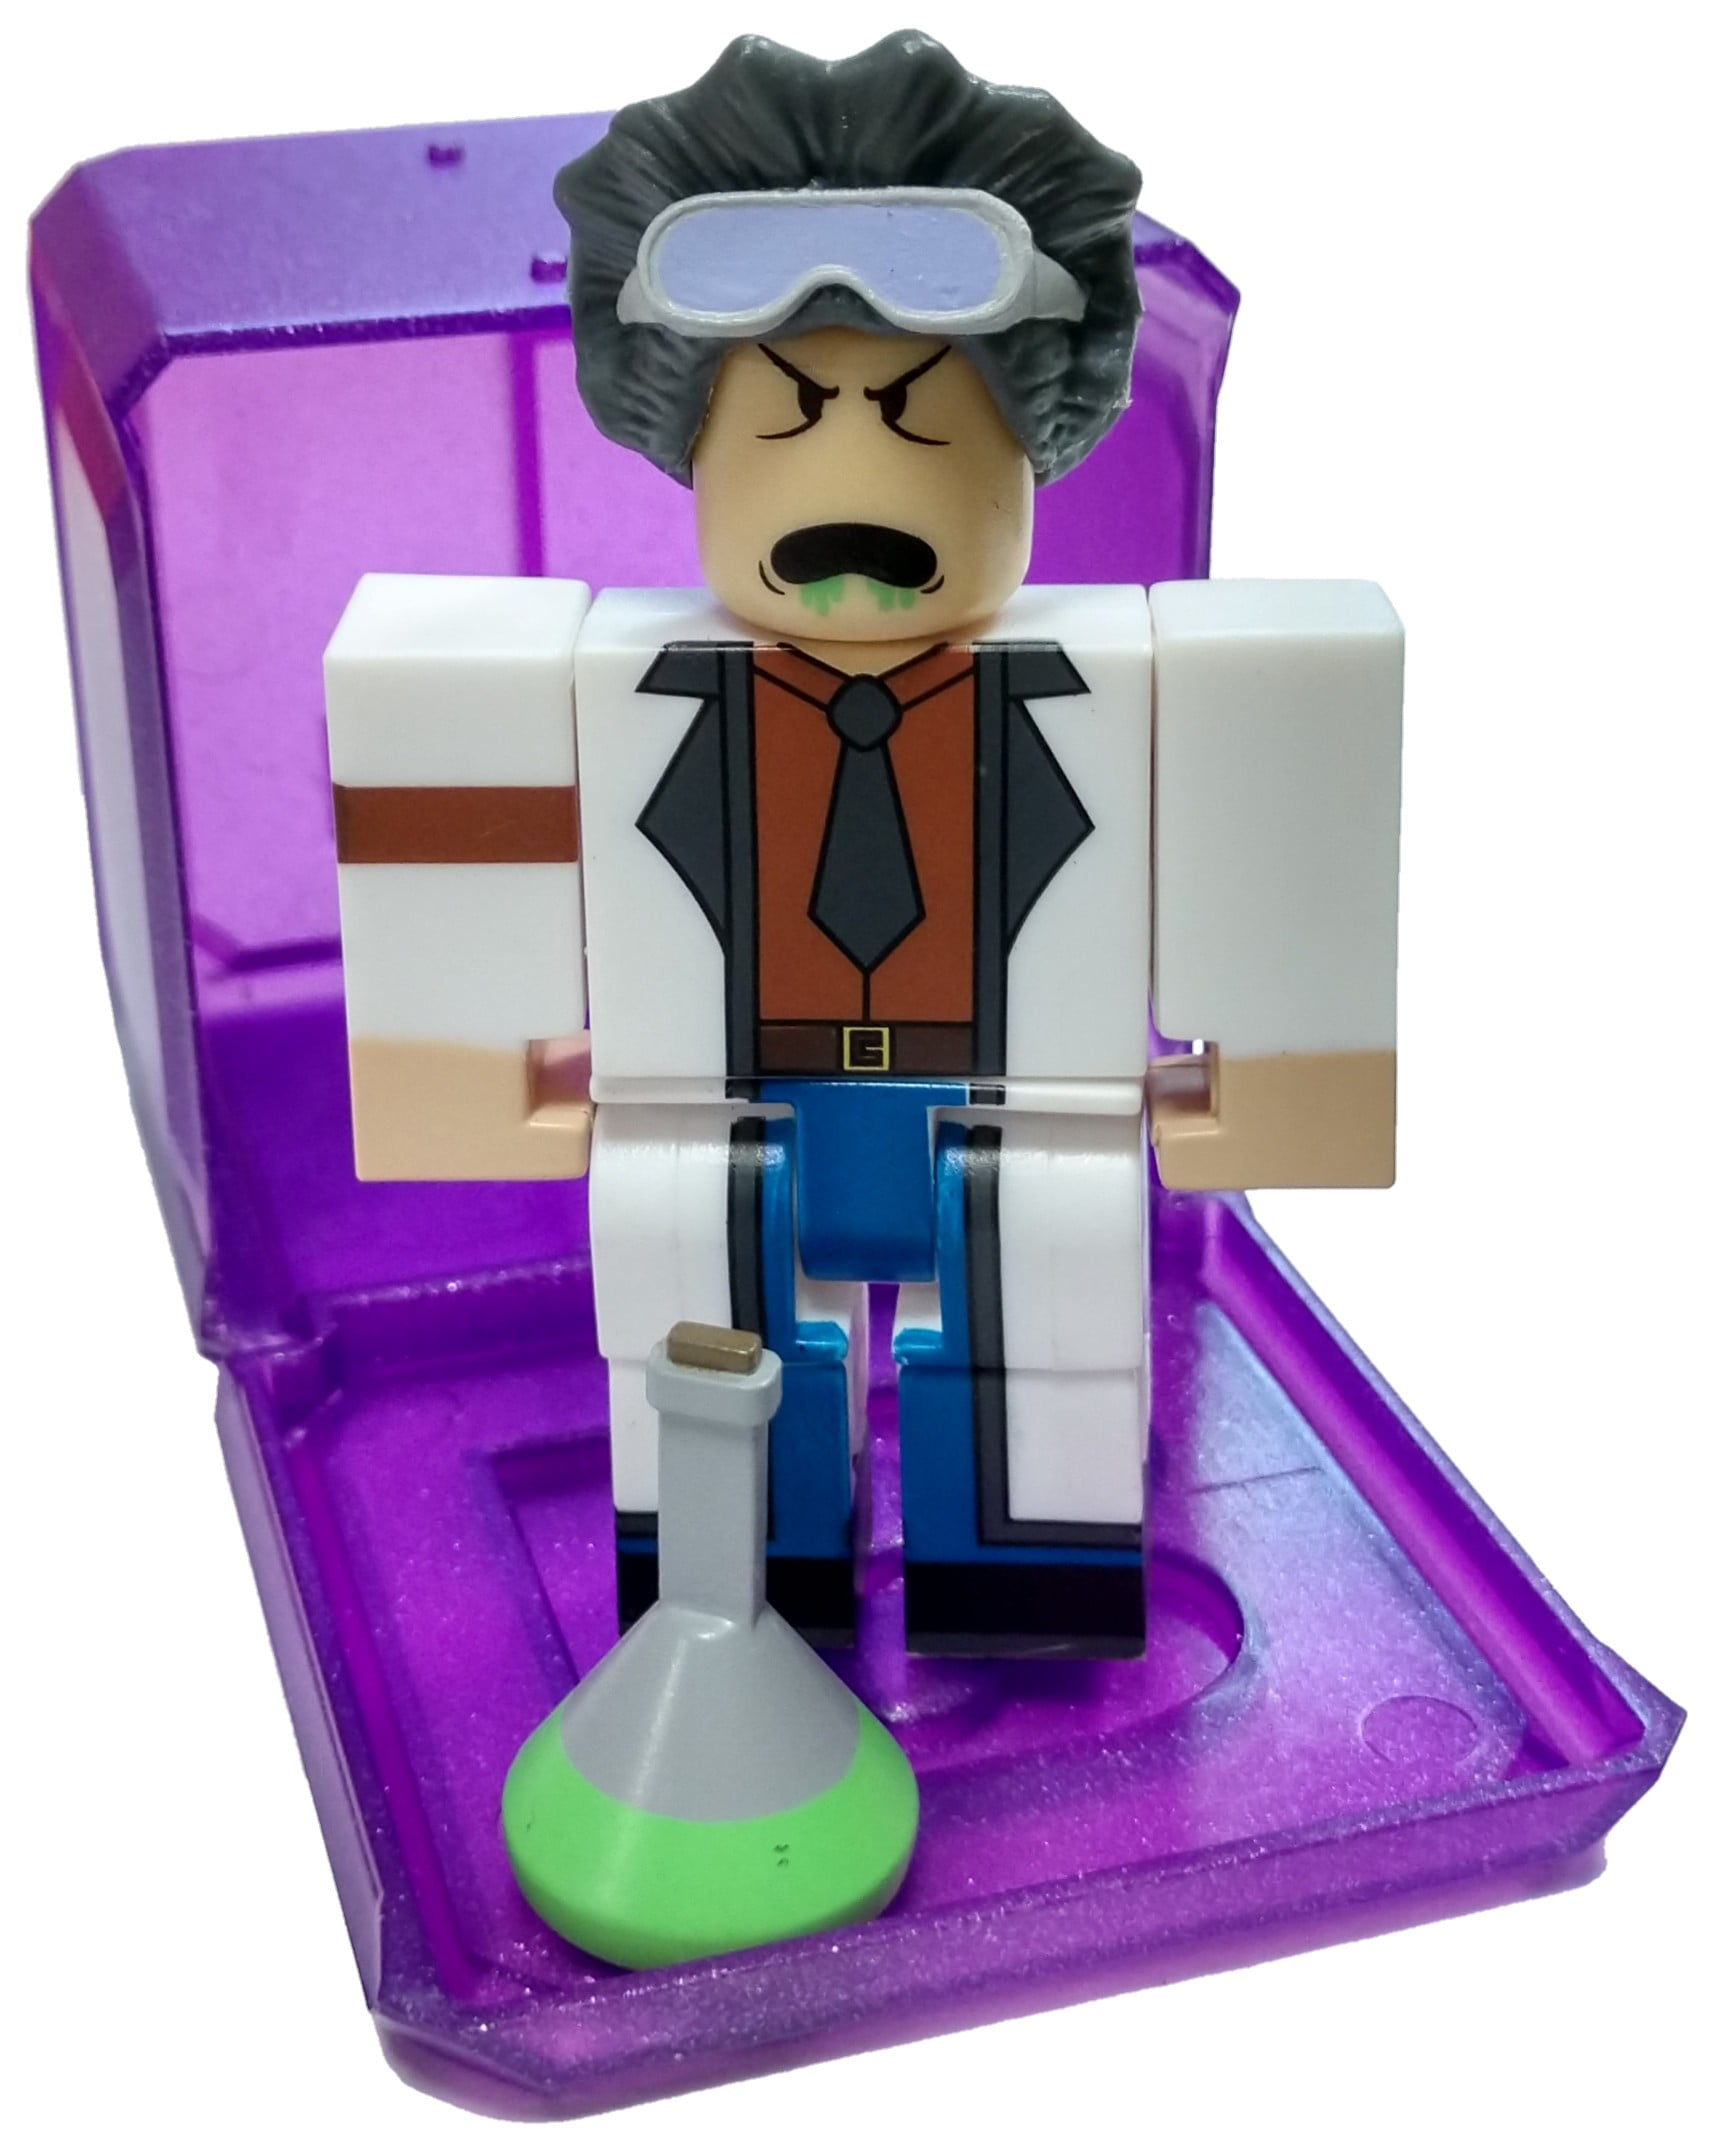 Roblox Celebrity Collection Series 3 Innovation Industries Scientist Zombie Mini Figure With Cube And Online Code No Packaging Walmart Com Walmart Com - roblox zombie figures